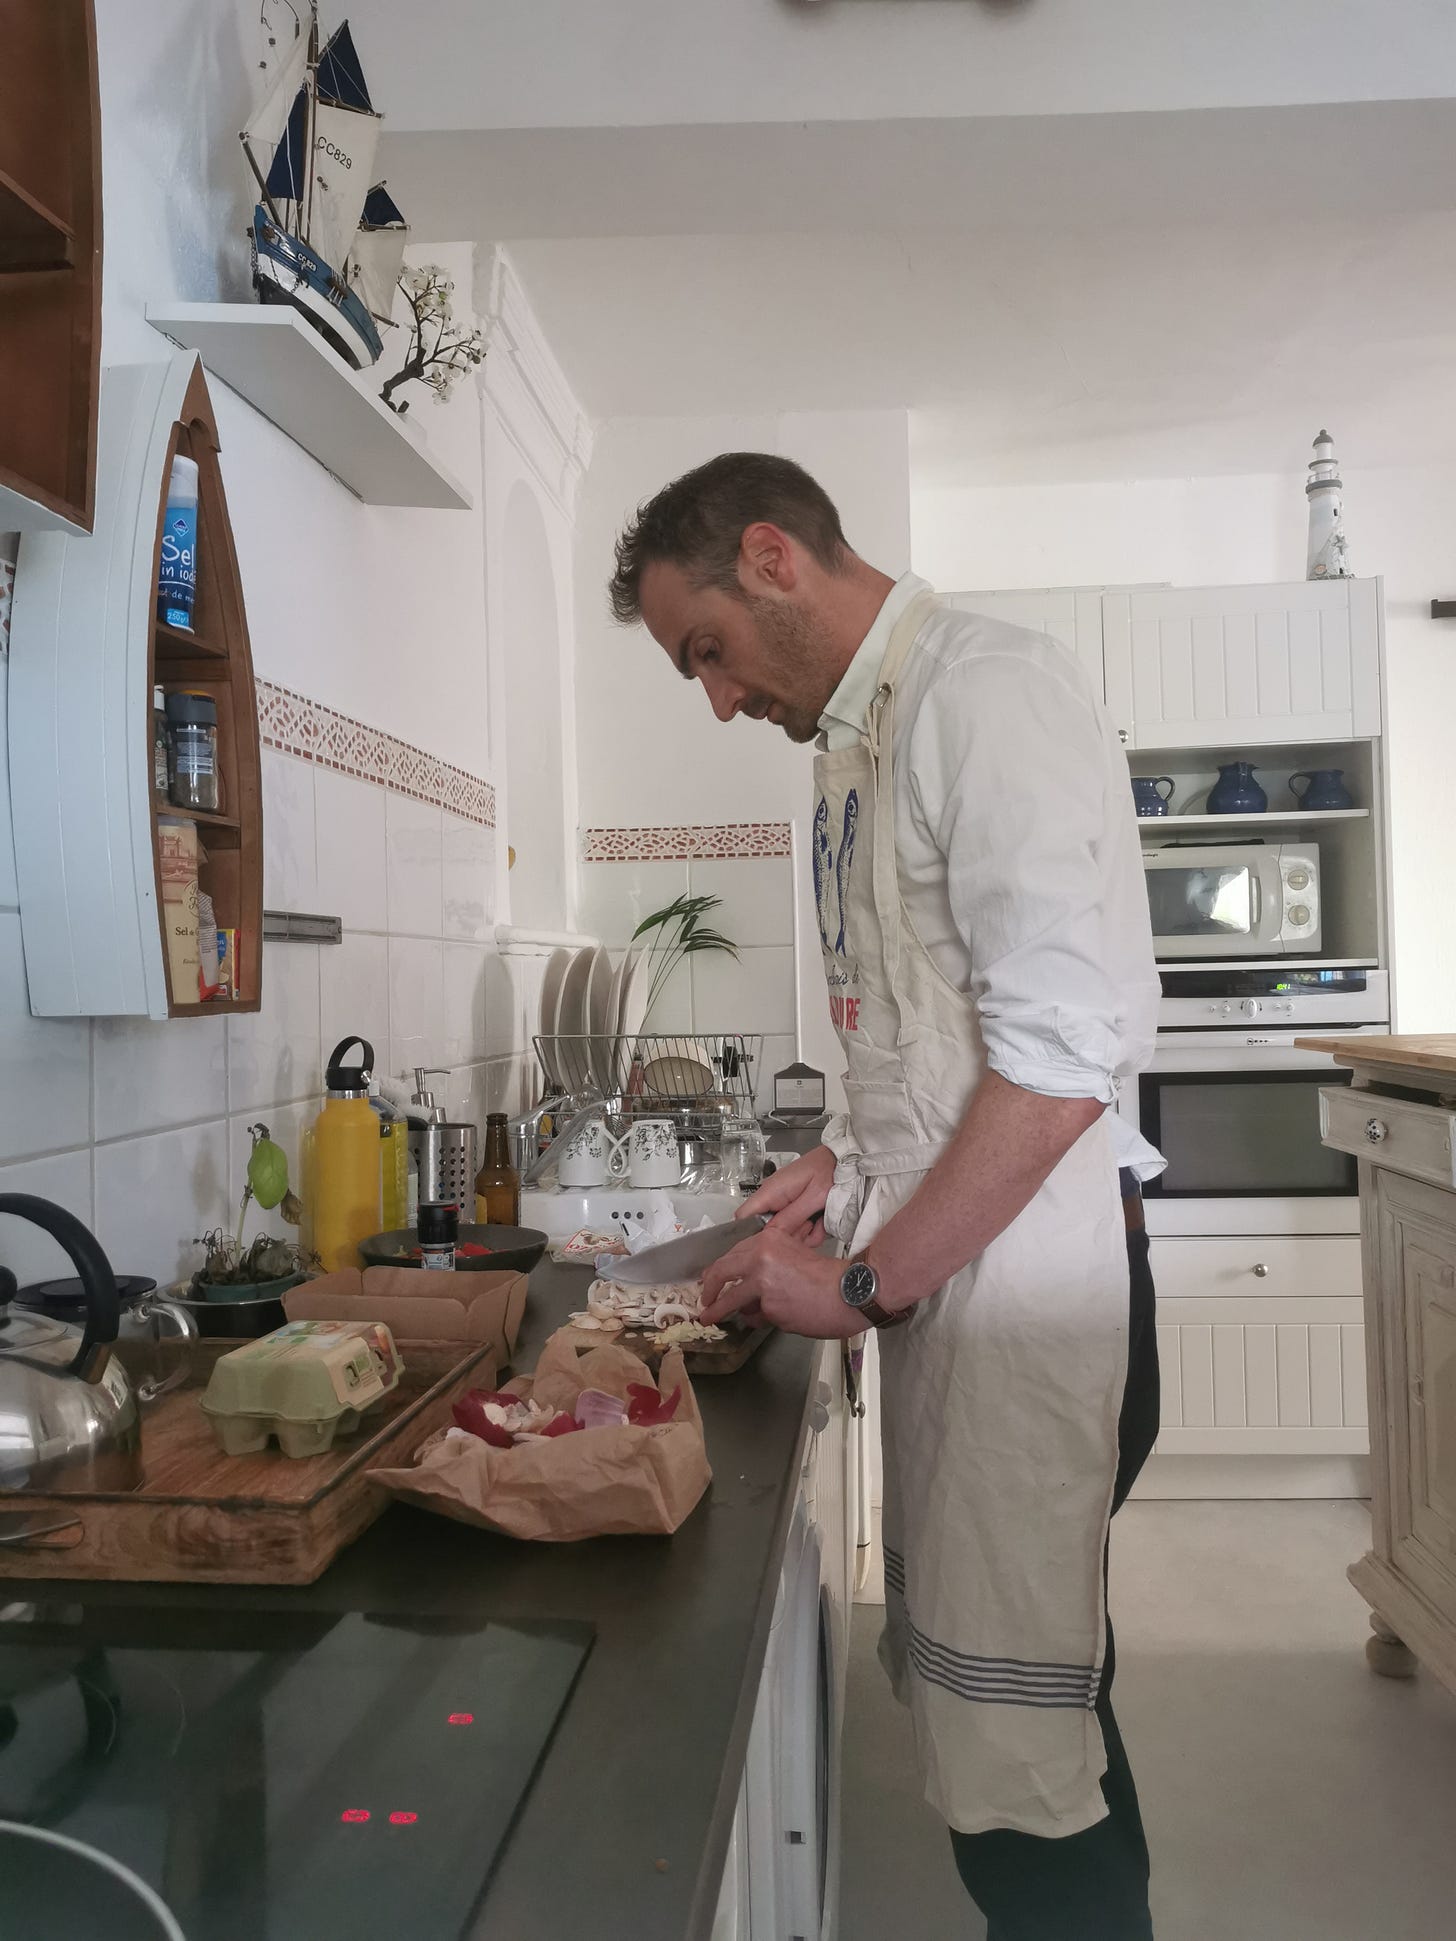 A man in a white shirt and apron chops mushrooms on a kitchen worktop.